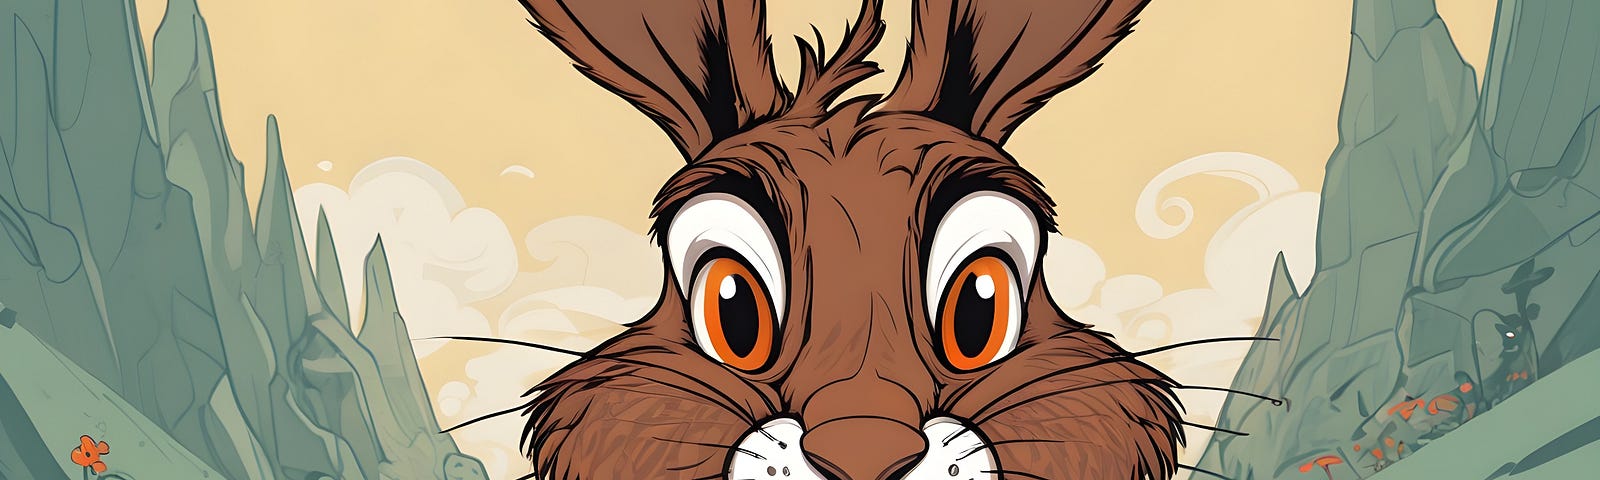 a mad march hare cartoon style fun cute arty